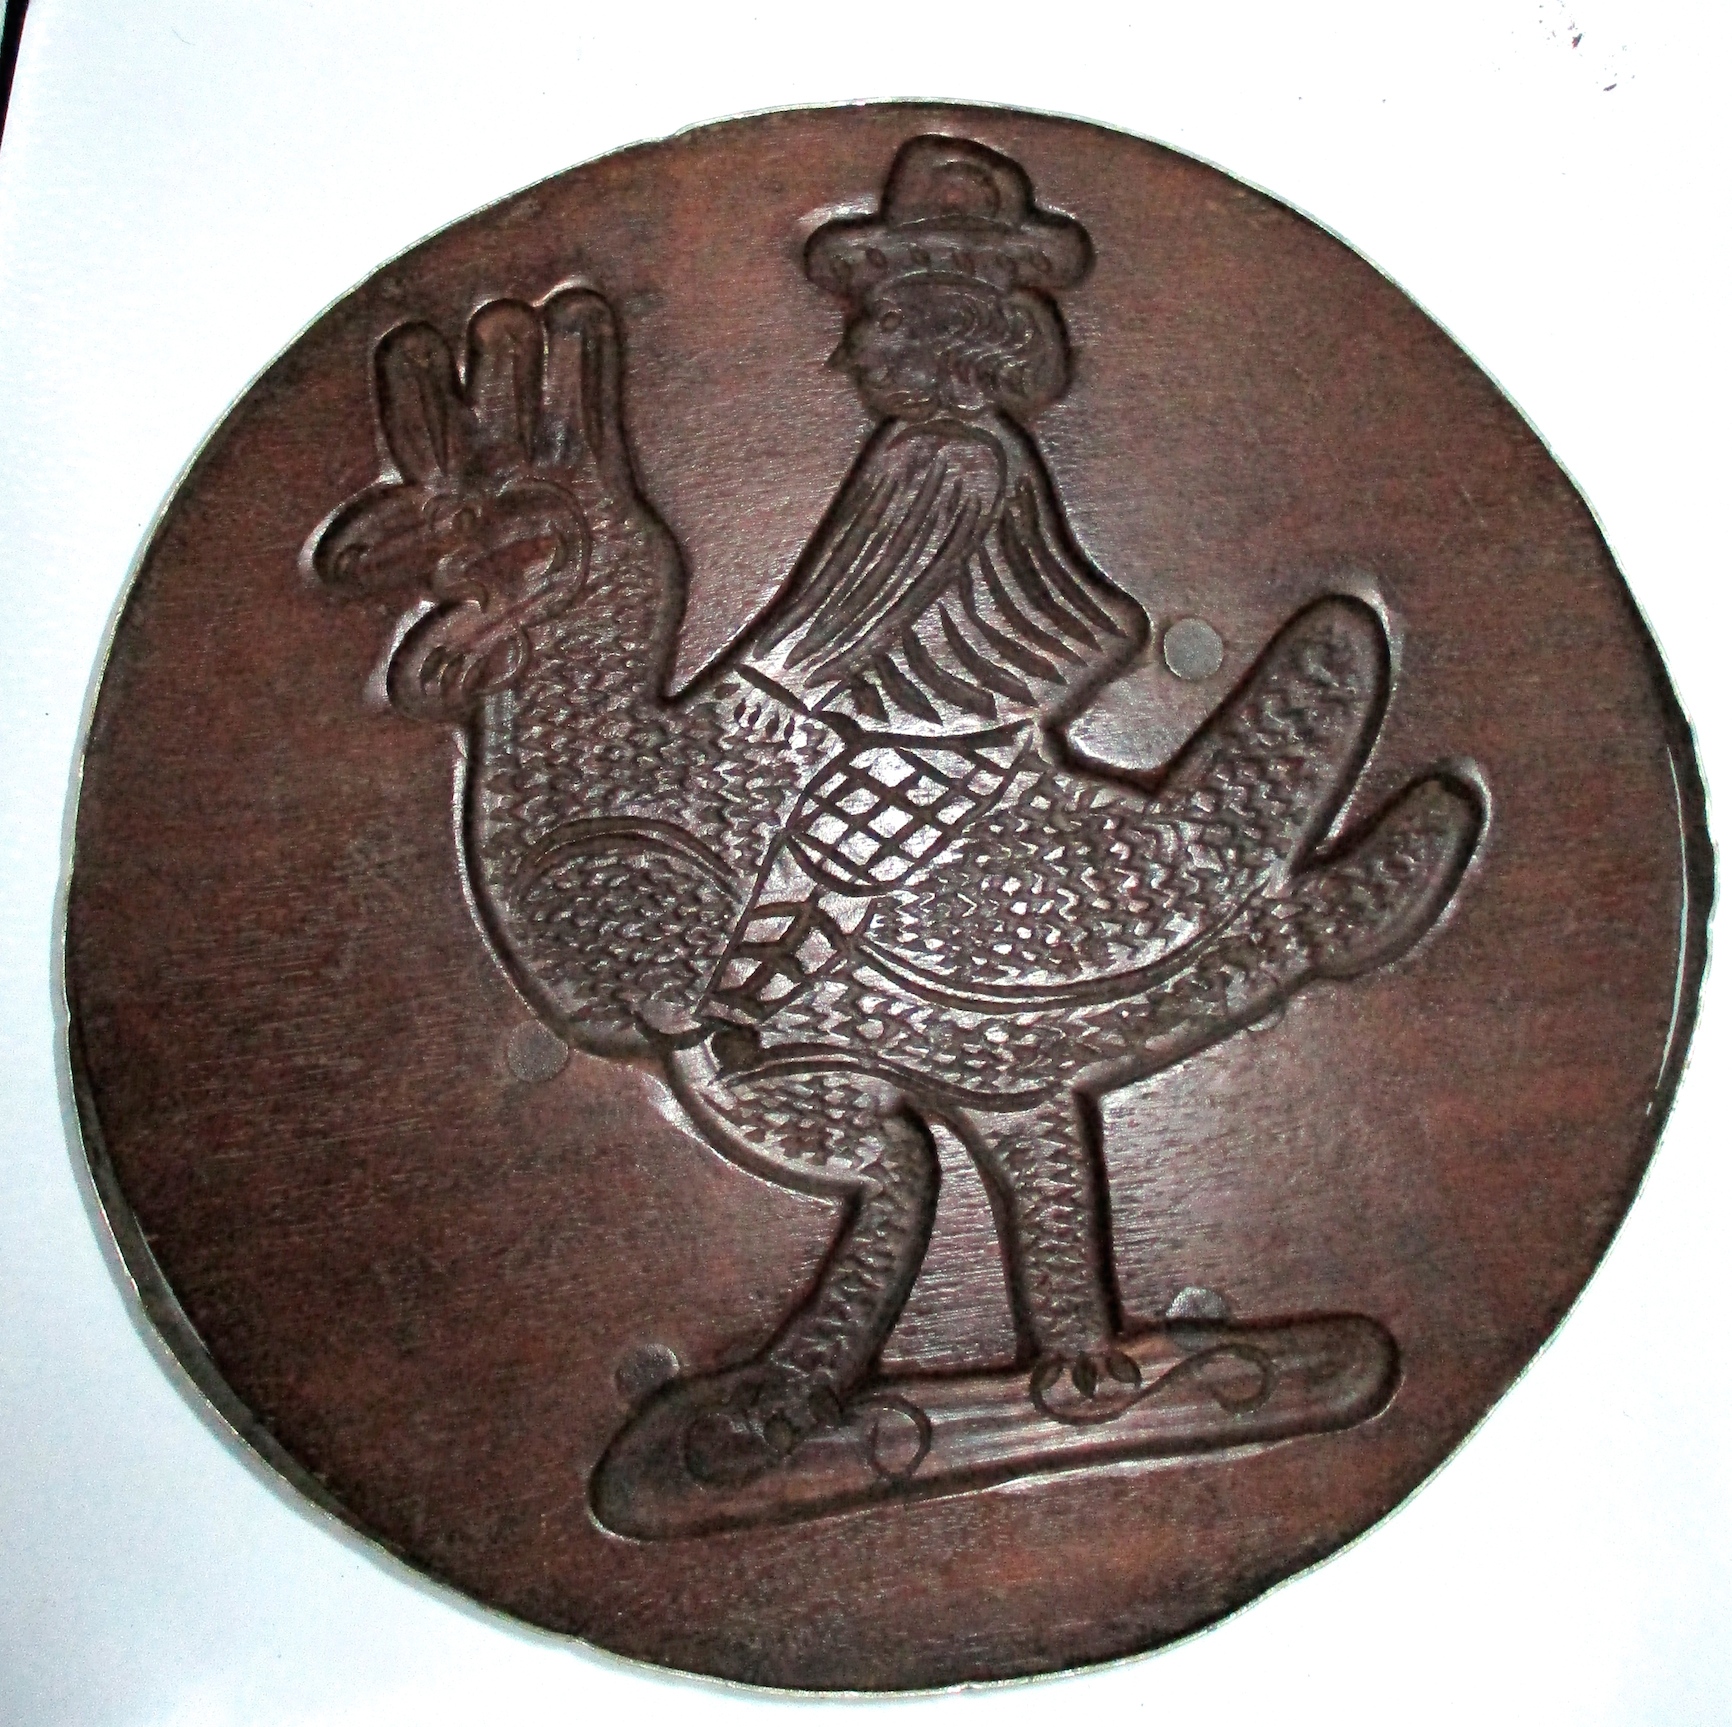 19th Century Hand-carved Figural "Fairing Cookie" Mold (15" Diameter)